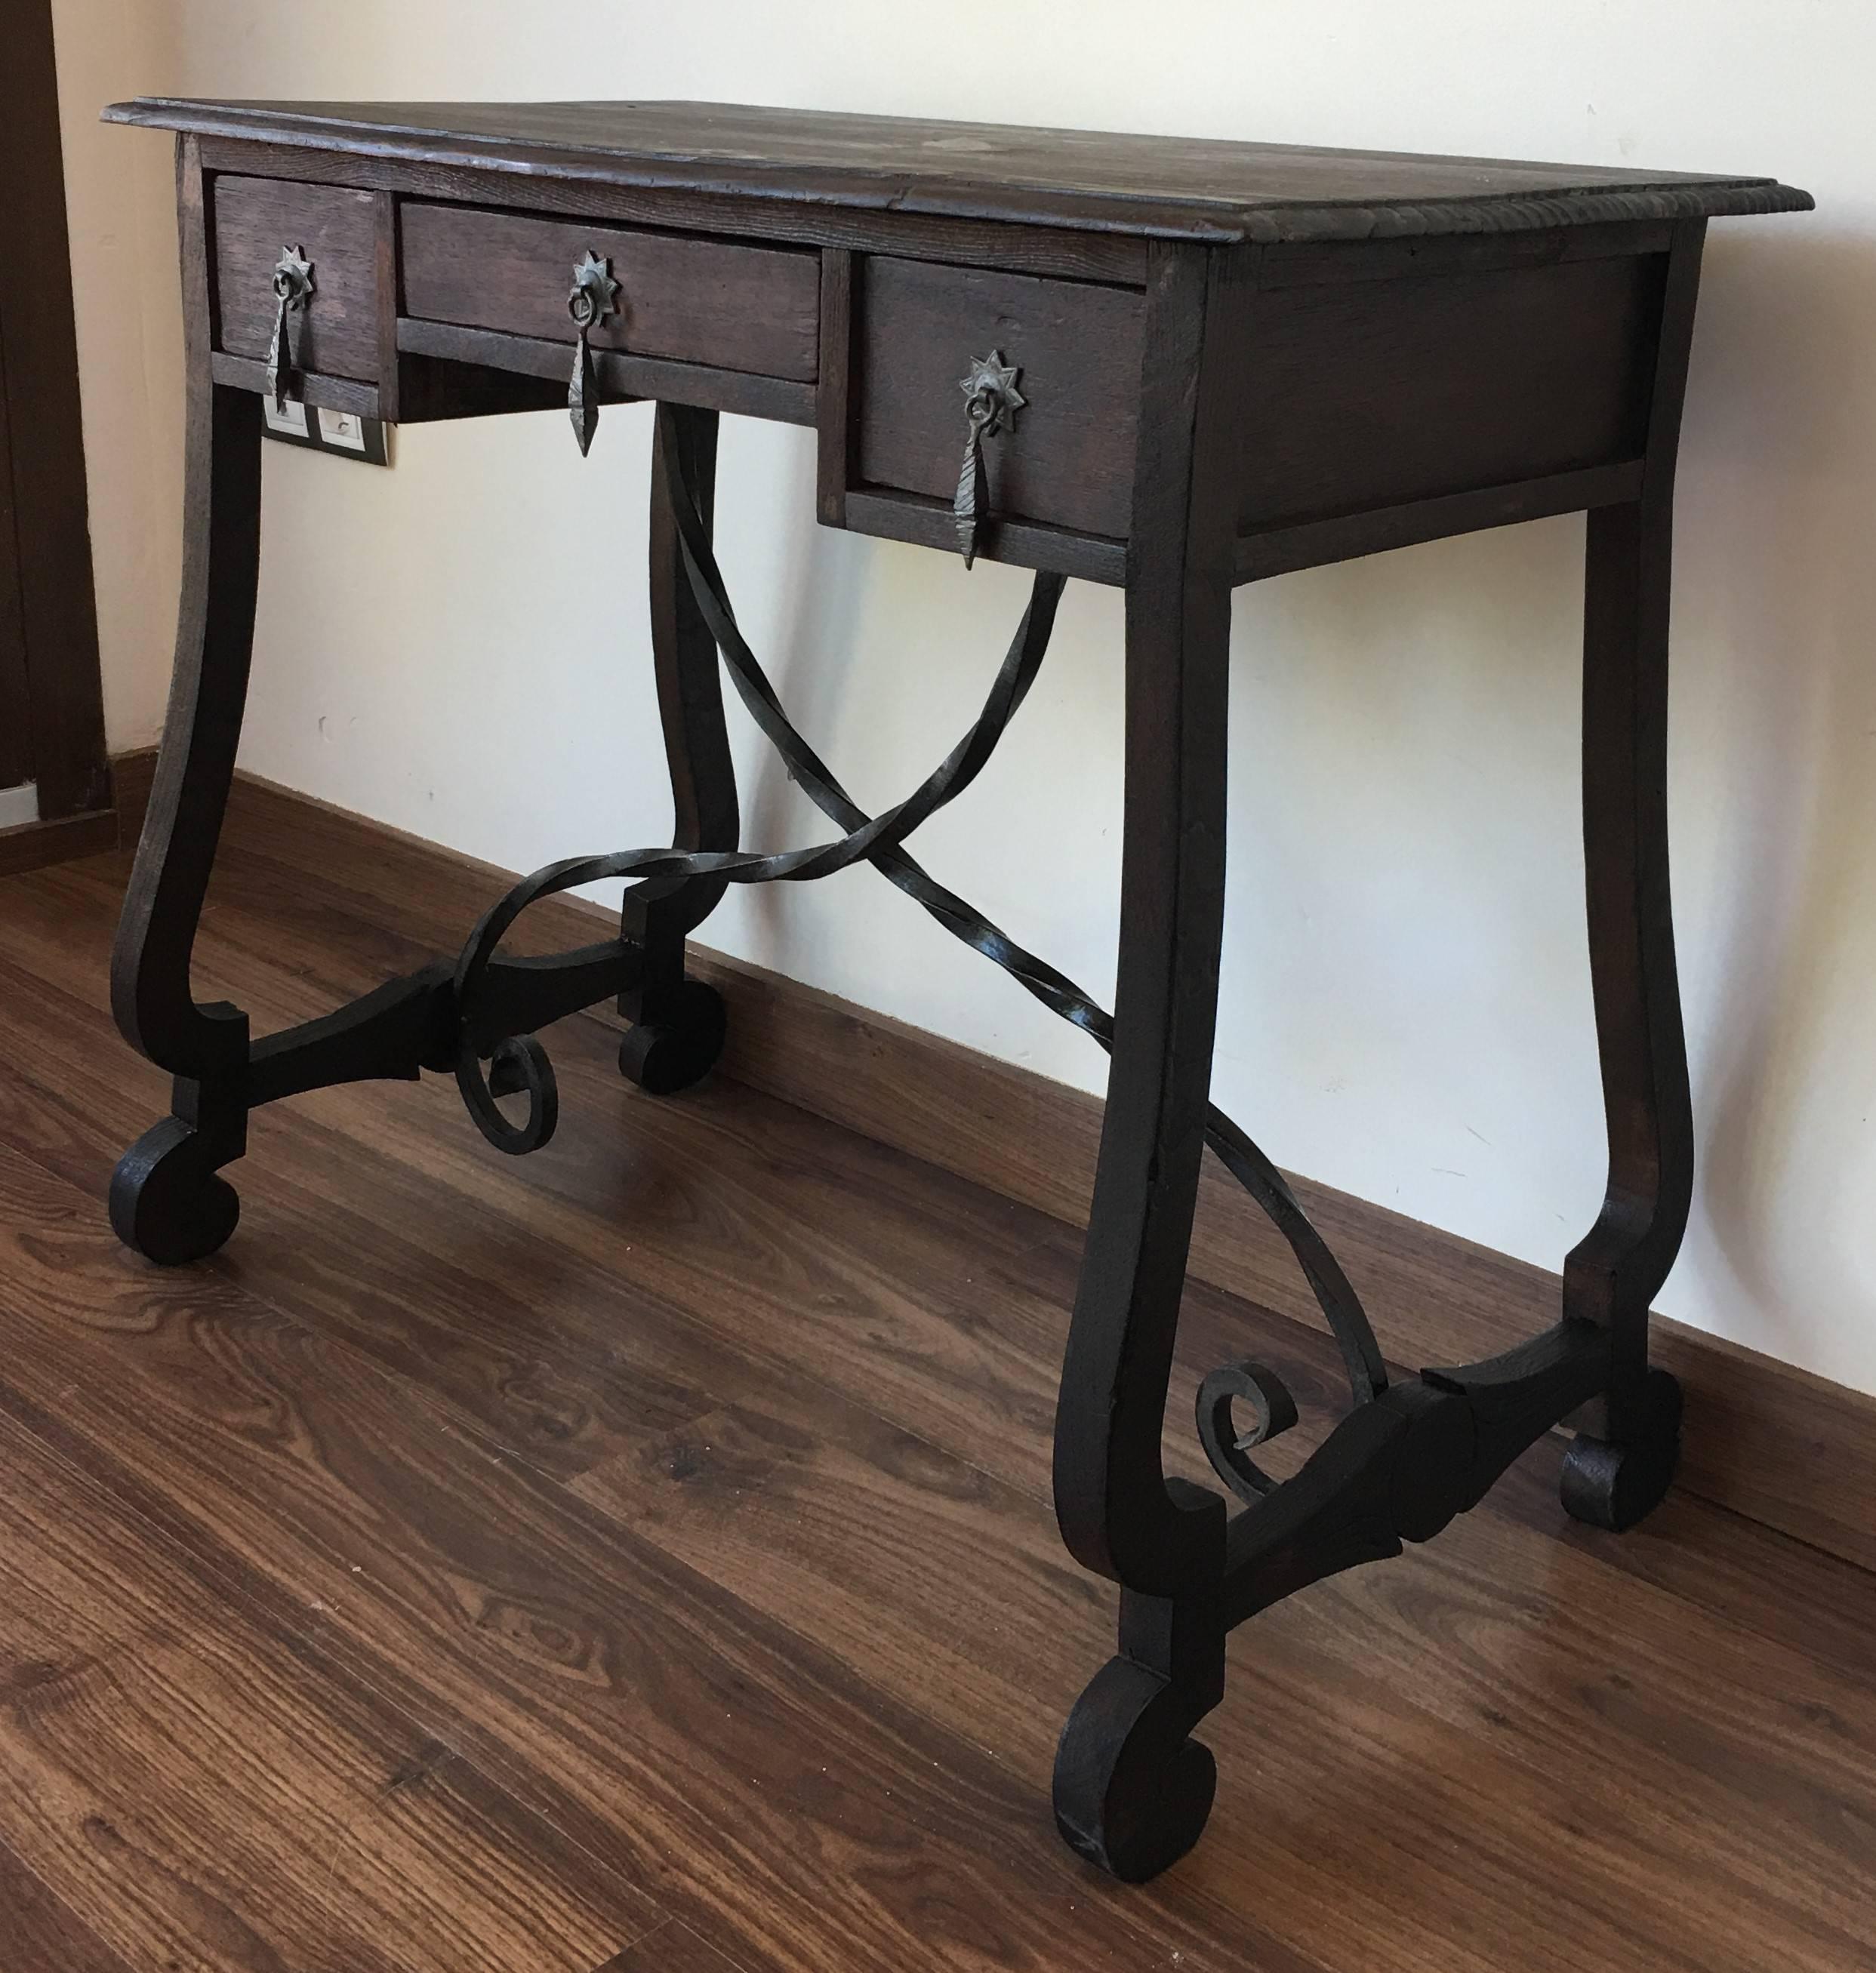 Exceptional Spanish 19th century side table with three drawers

